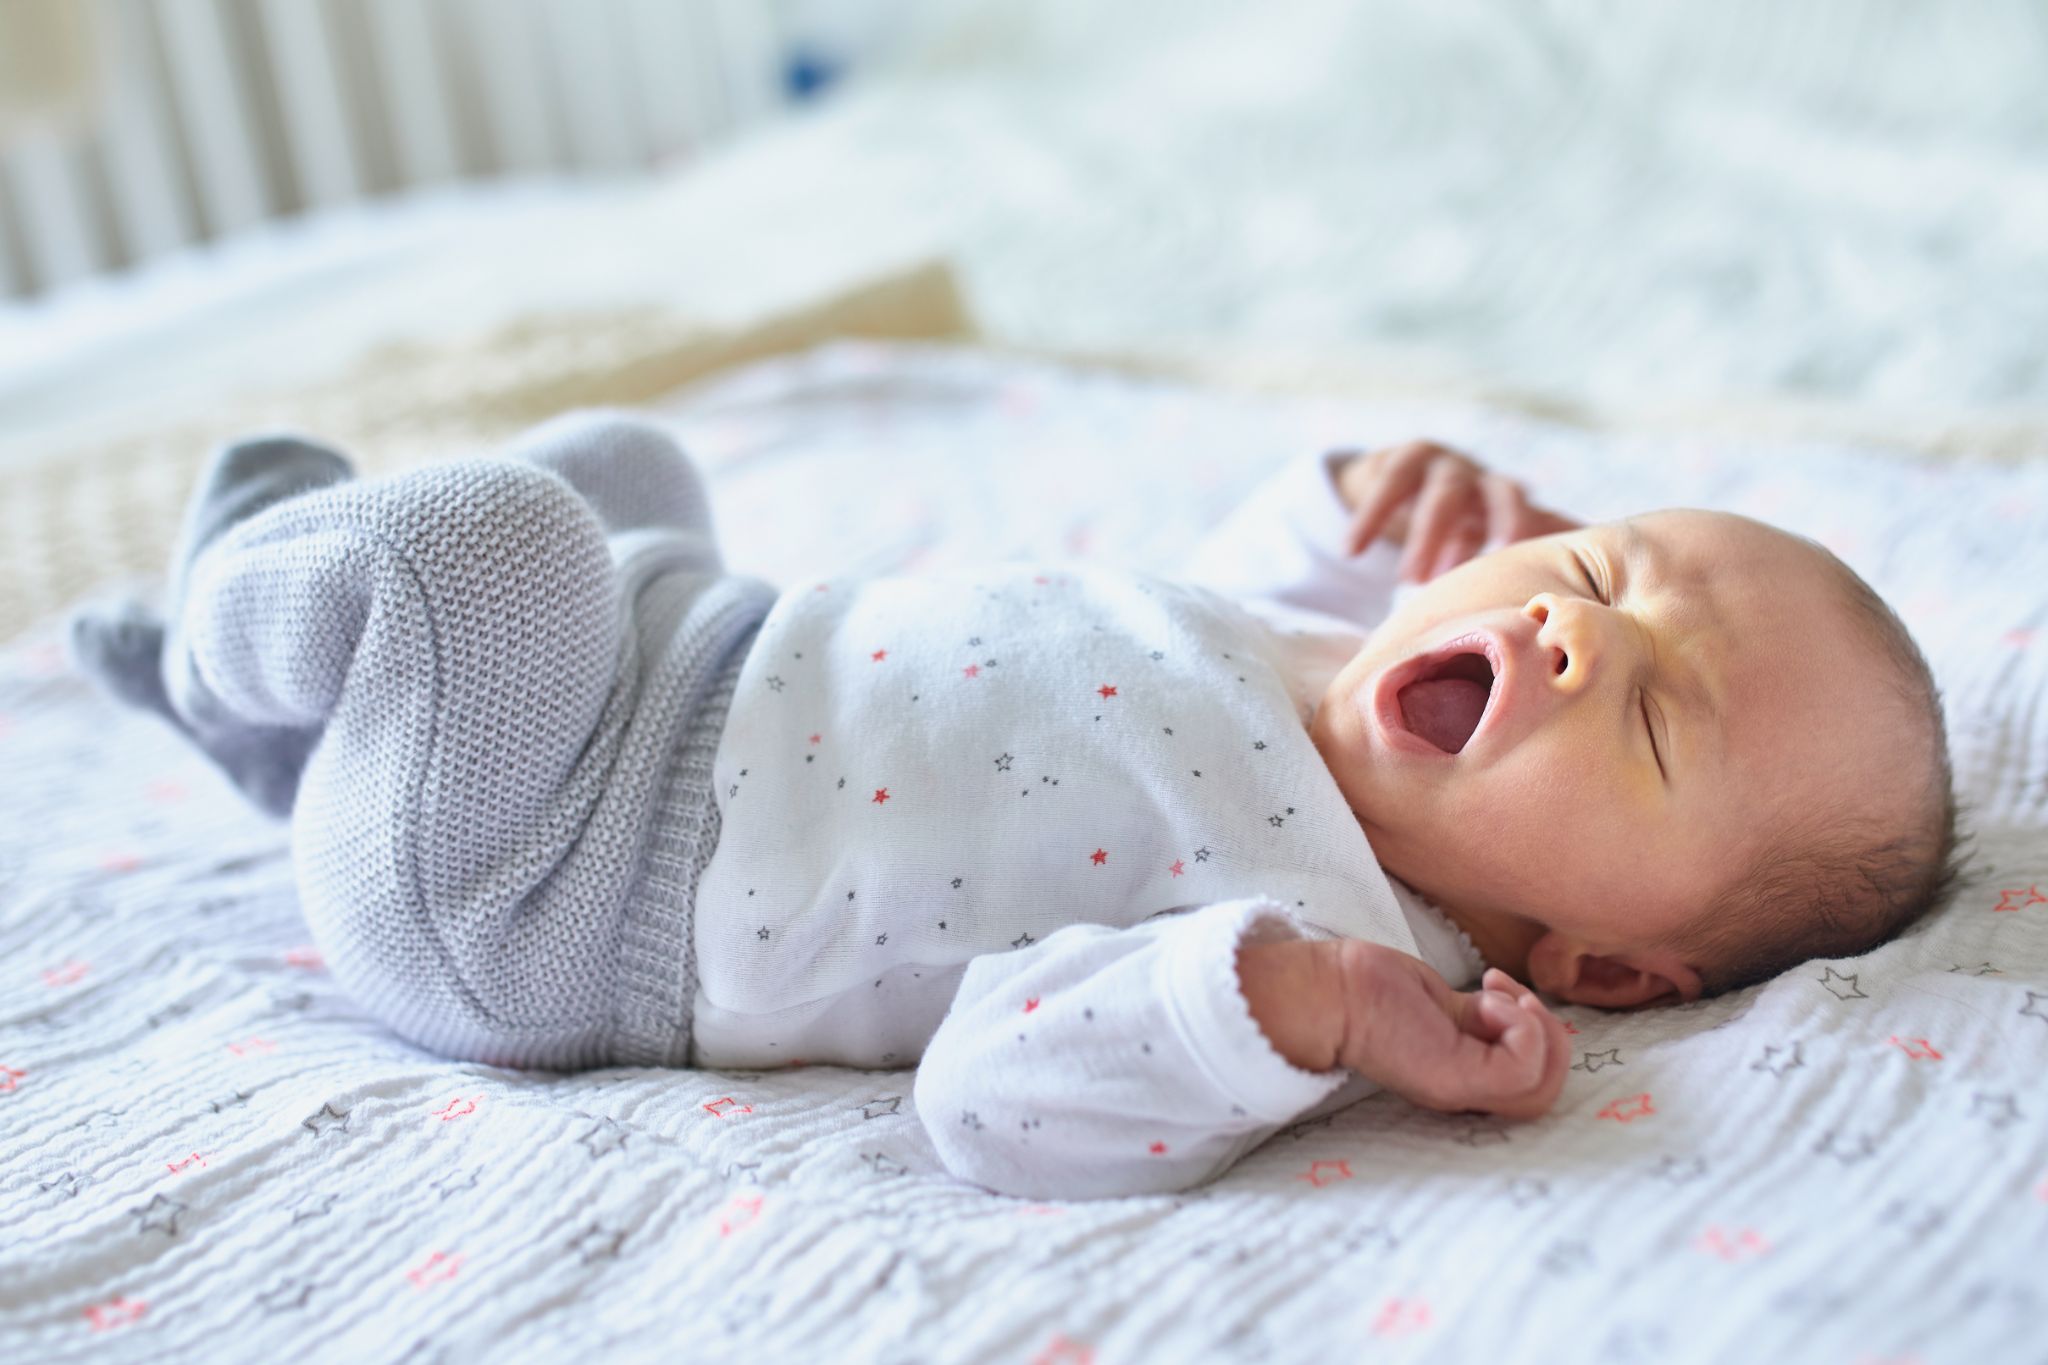 Adorable newborn baby sleeping and yawning in bed at home